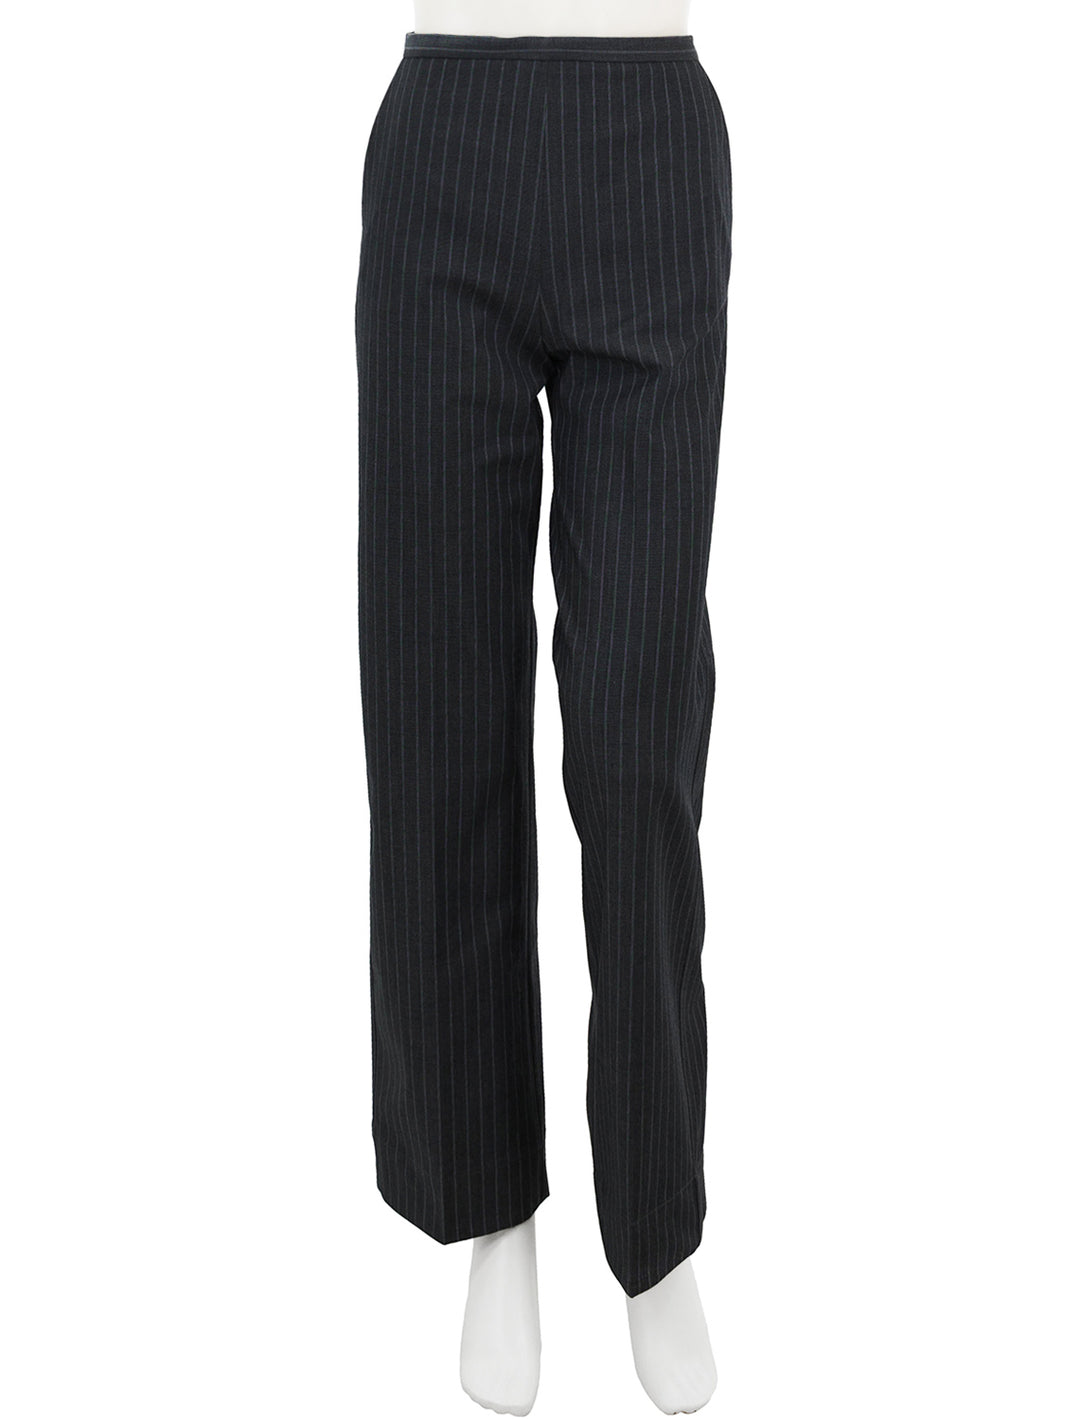 Front view of GANNI's stretch stripe mid waist pants.